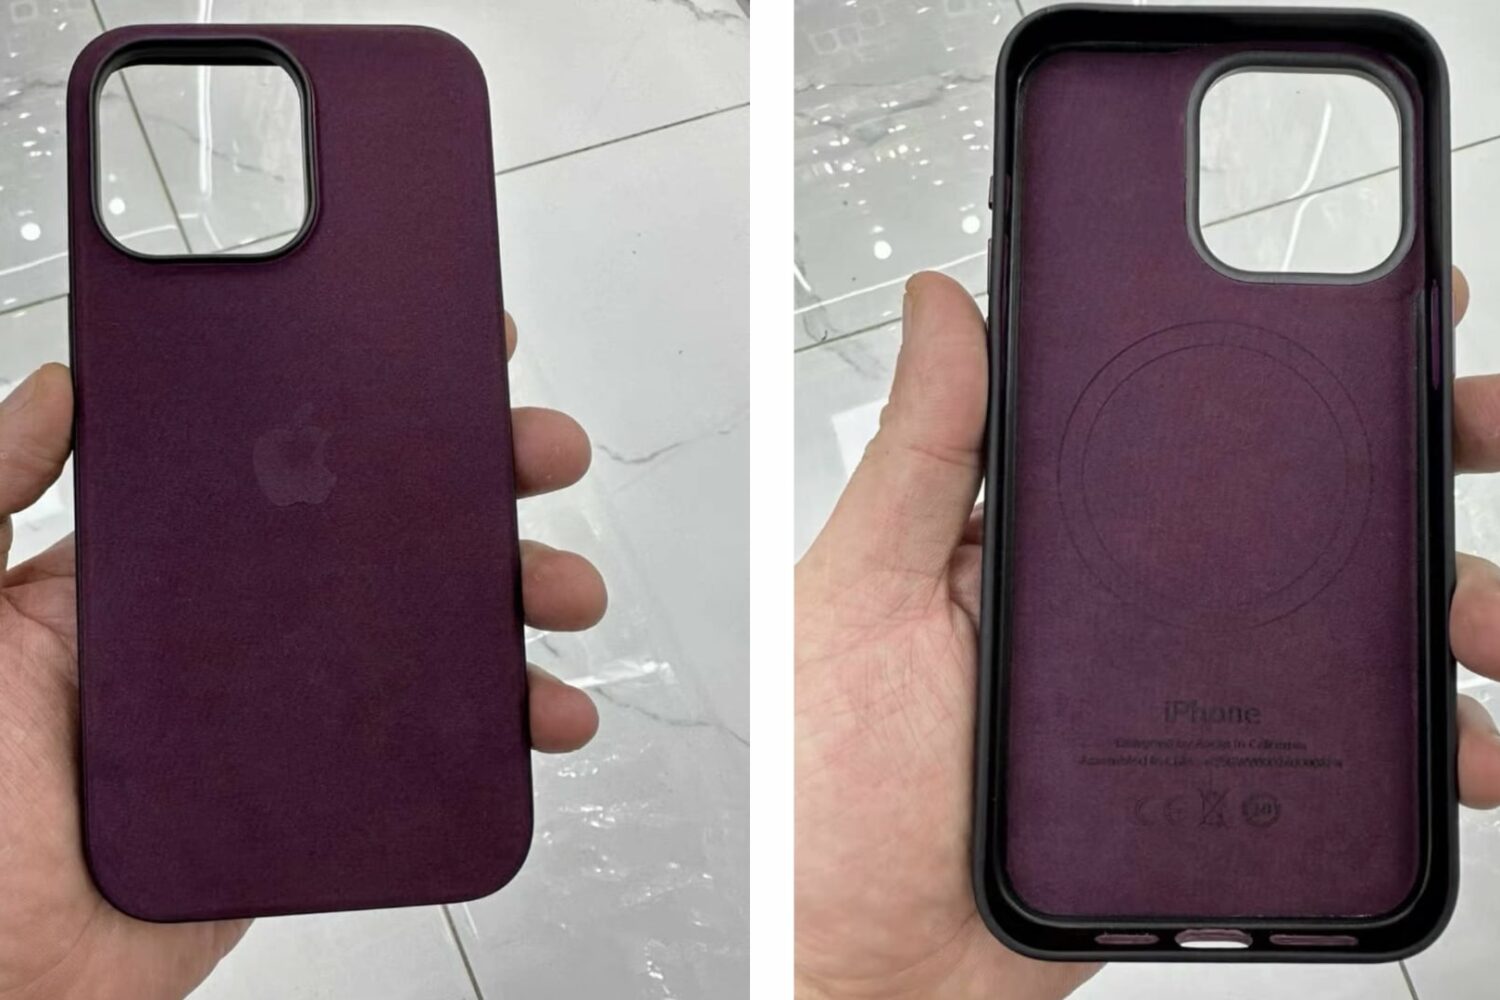 Eco-friendly iPhone case made from vegan materials instead of leather